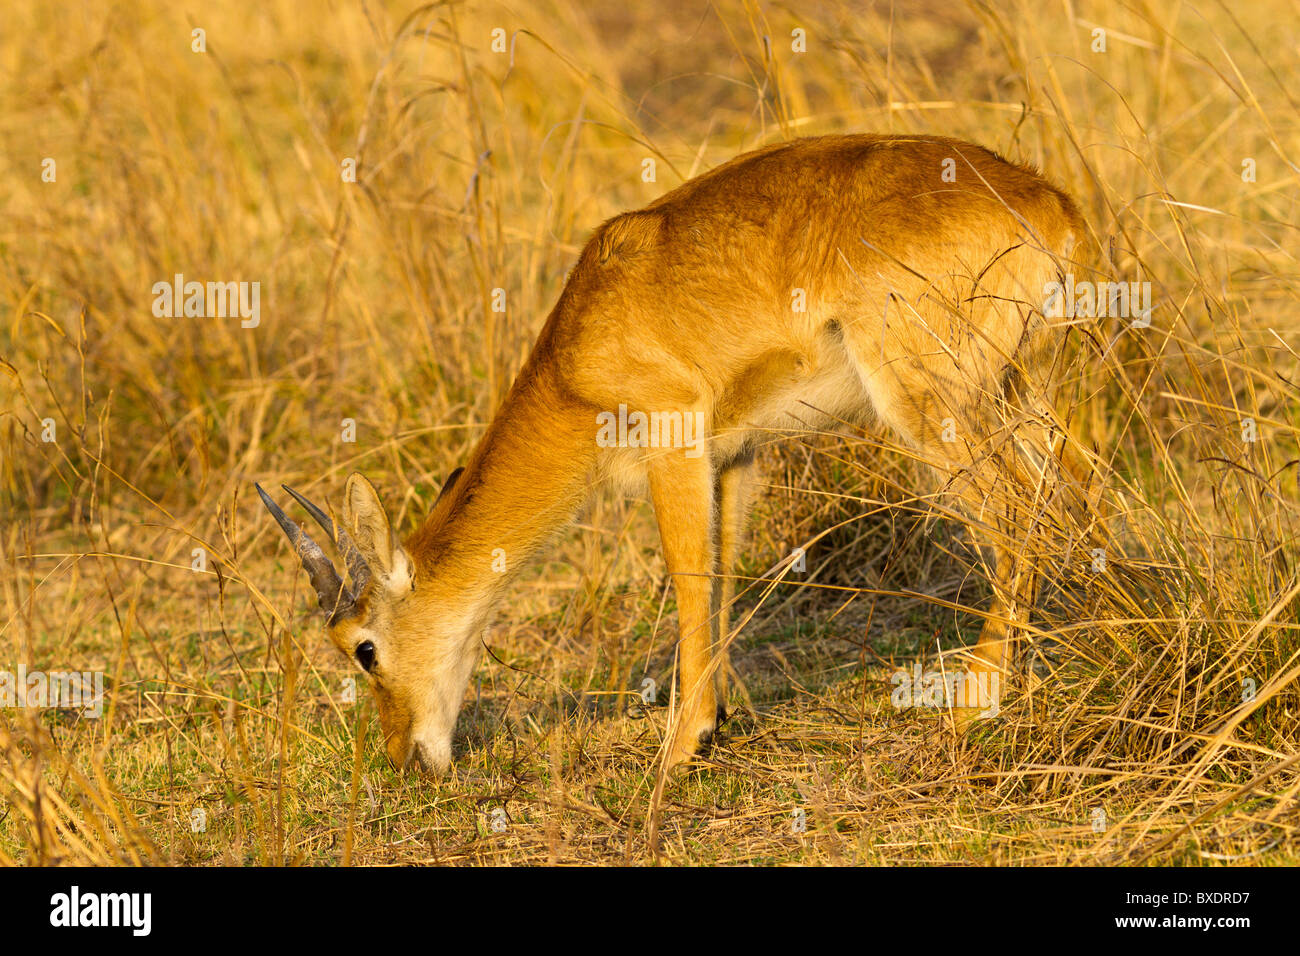 View of young male deer-like puku animals (Kobus vardonii), seen while on safari in South Luangwa Valley, Zambia, Africa. Stock Photo